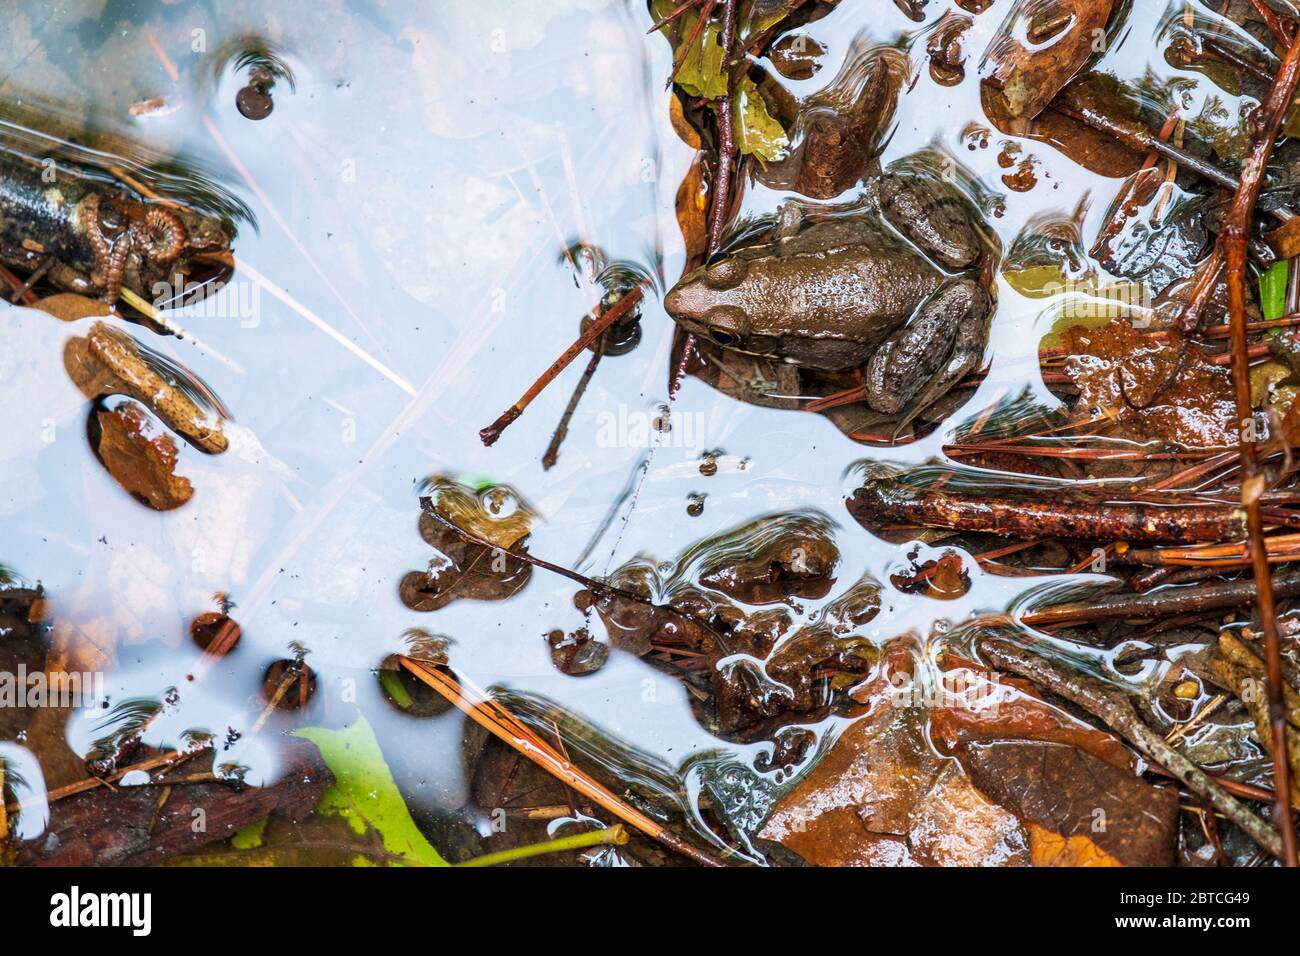 Top view of a green frog in the edge of a stream. Arrangement of bits and pieces of debris could make a good puzzle. Stock Photo